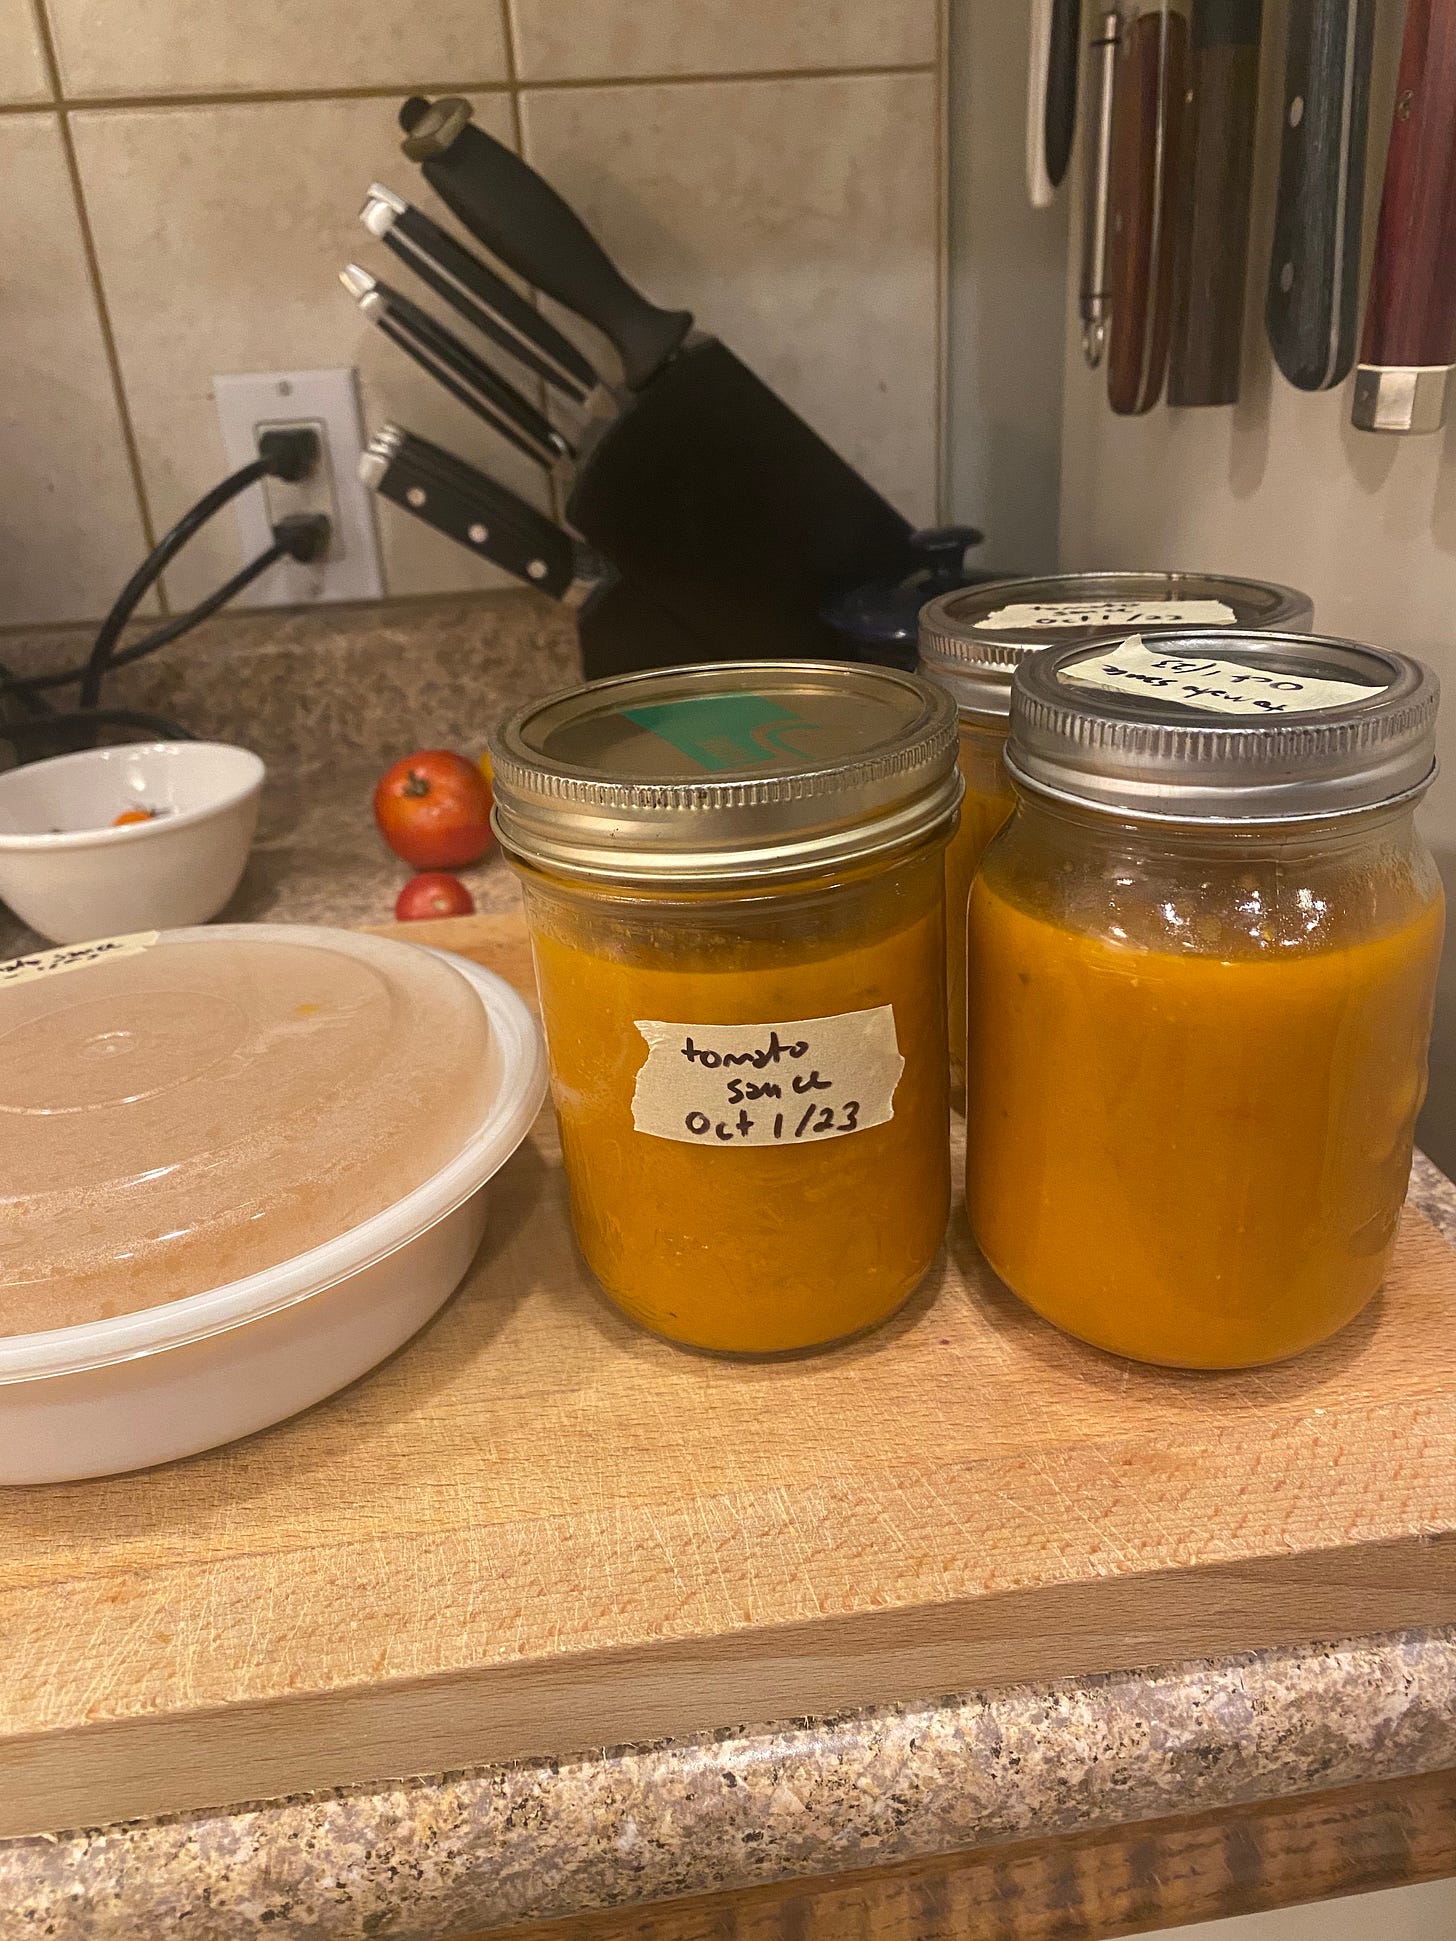 Three pint jars of orangeish tomato sauce, with masking tape labels showing the date. There is also a round white plastic container of the same. All of them rest on a wooden cutting board with a knife block in behind.